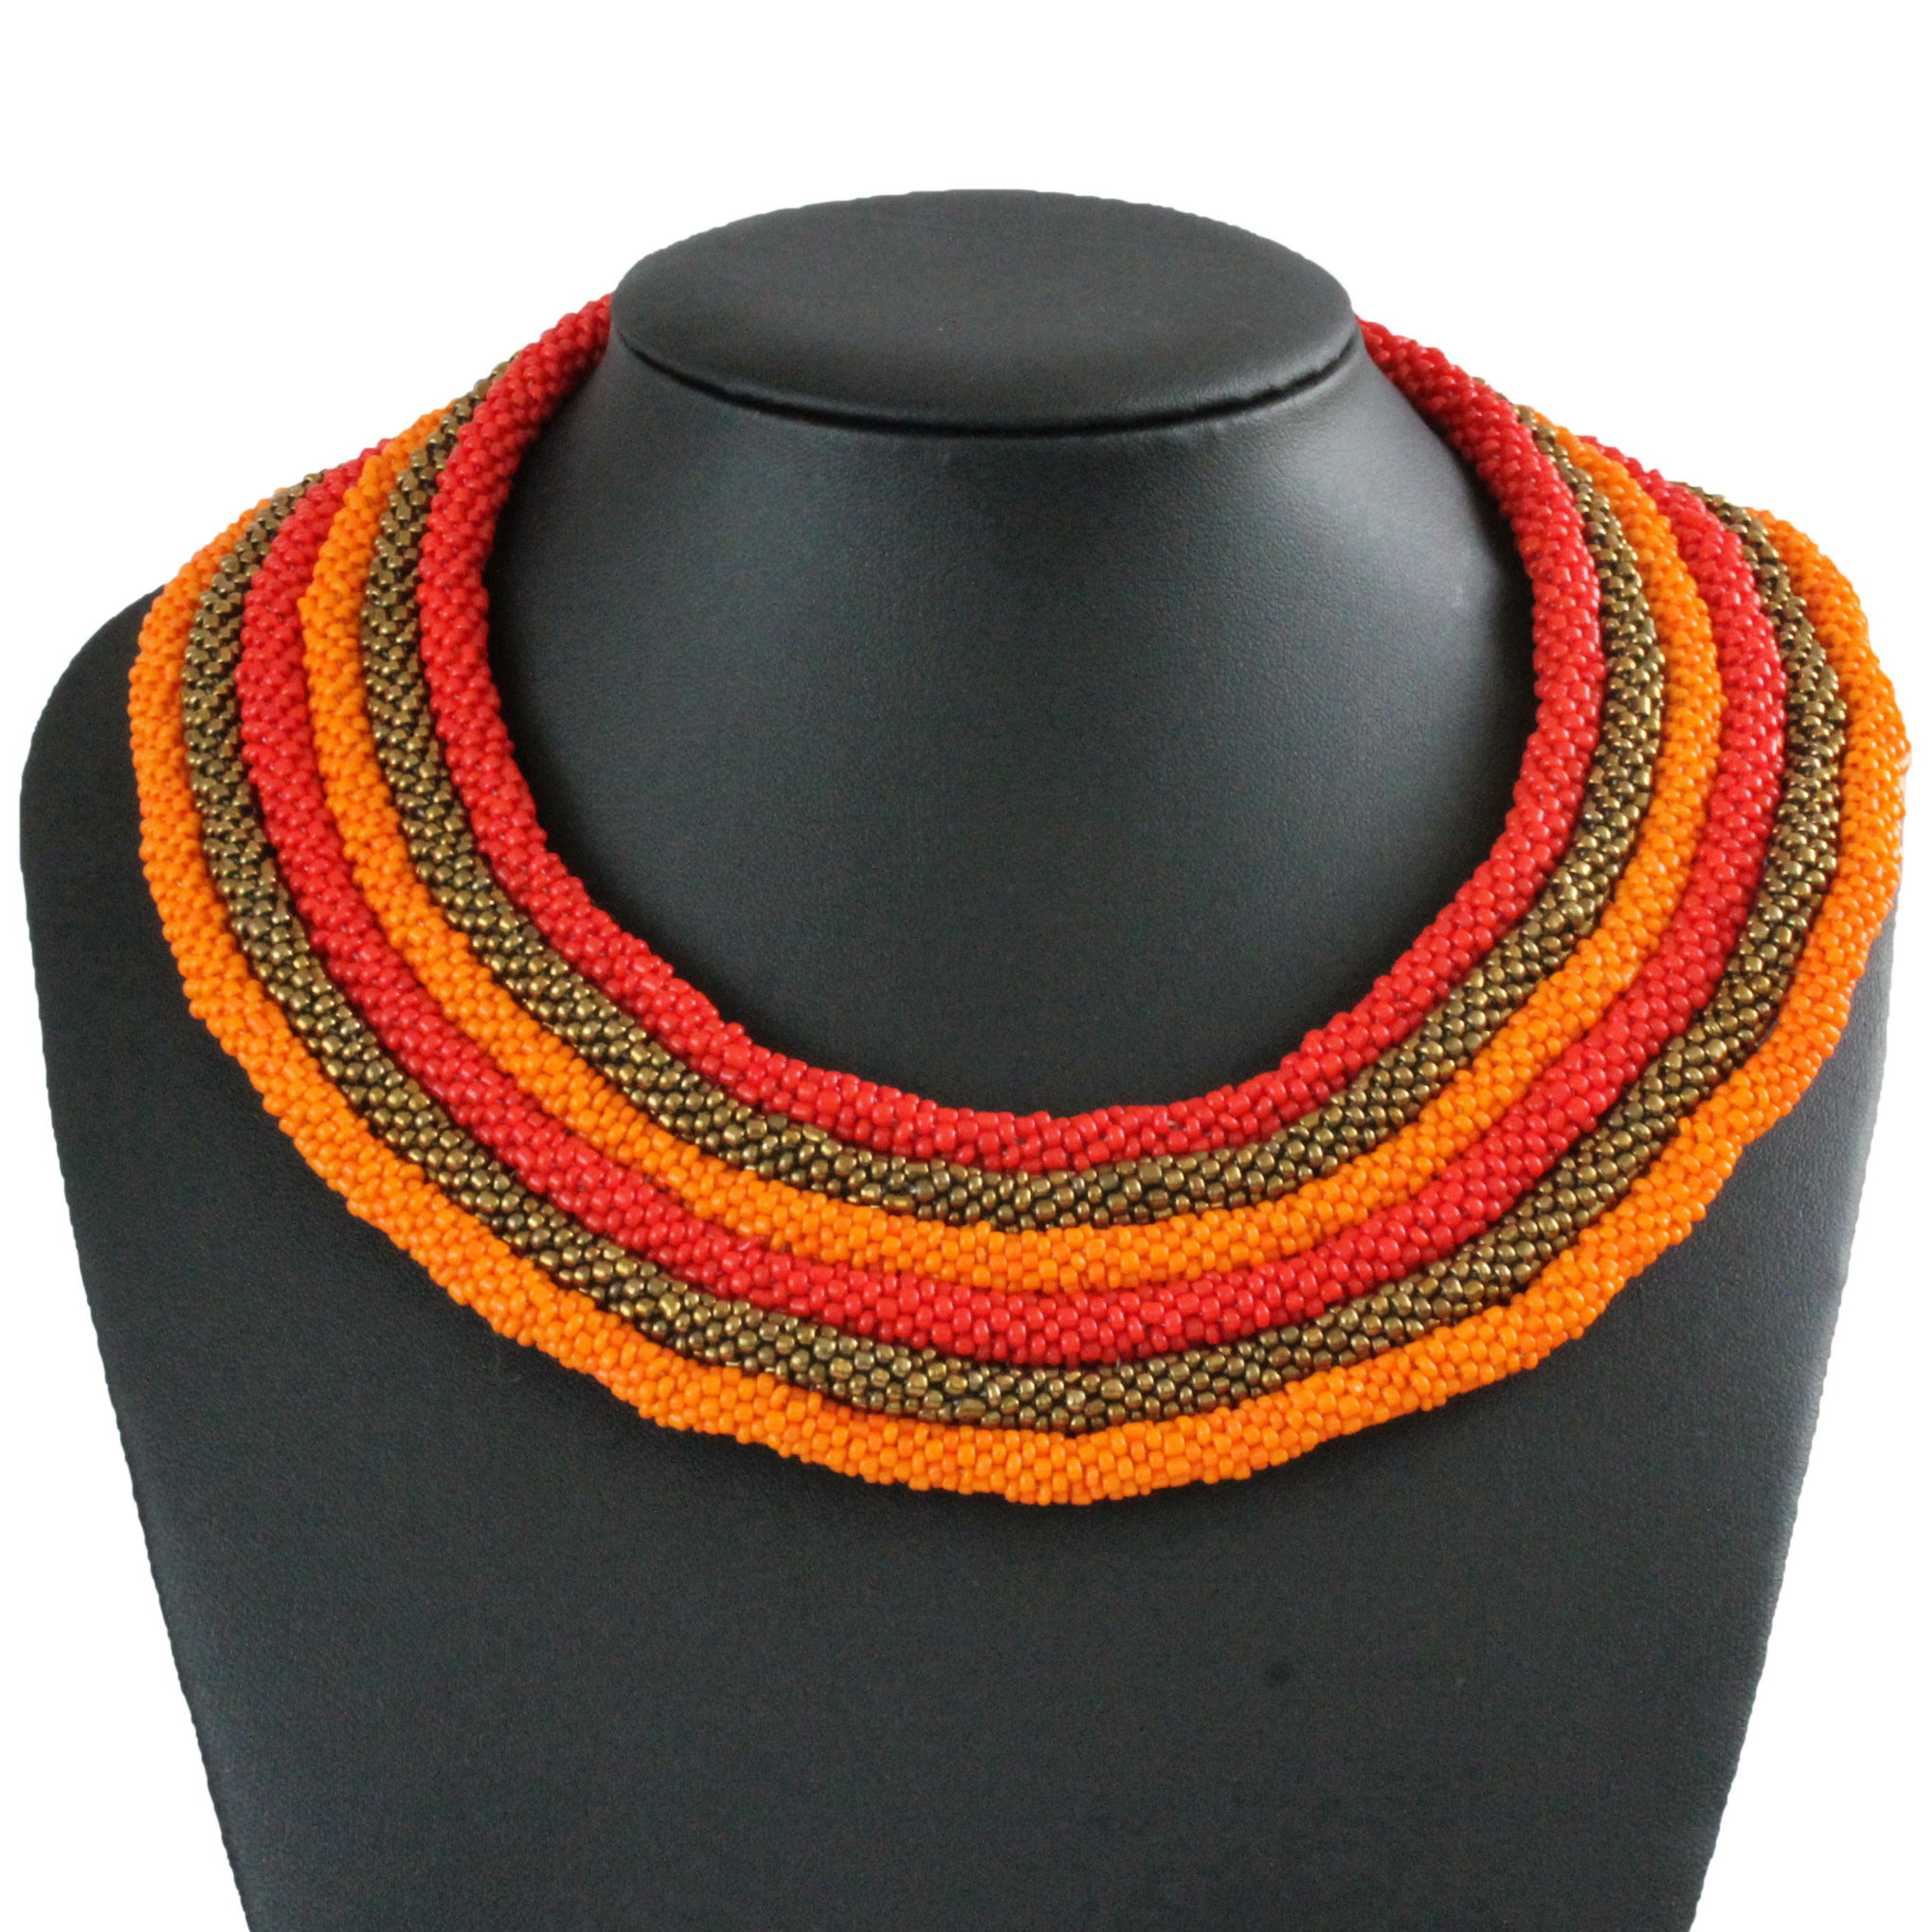 African handmade necklace, beads, multicoloured, black display